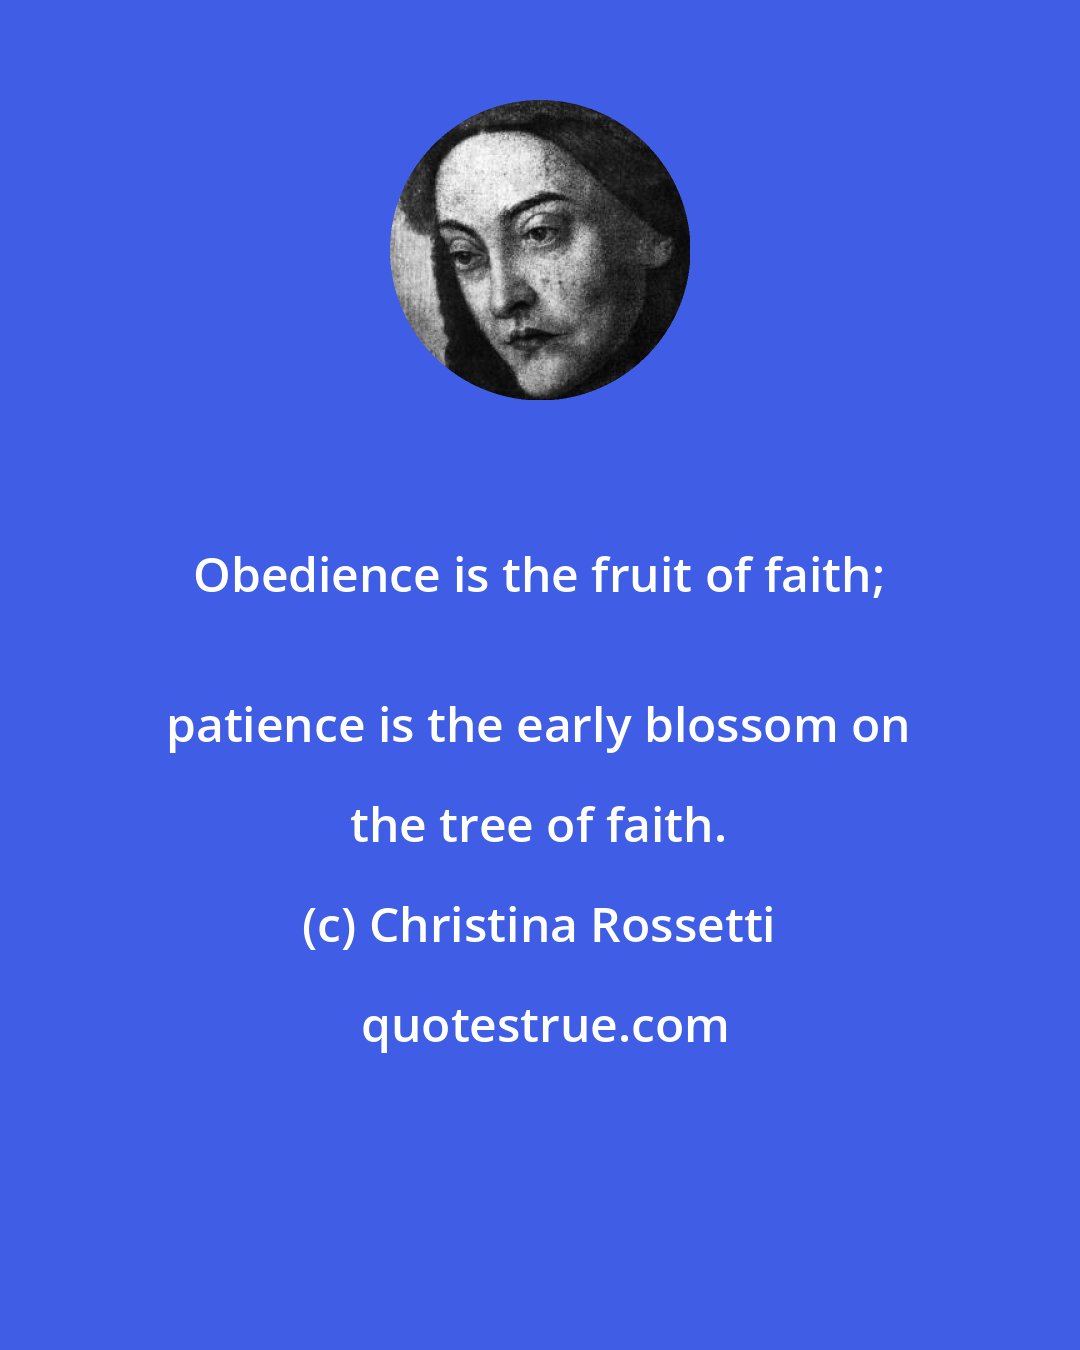 Christina Rossetti: Obedience is the fruit of faith; 
 patience is the early blossom on the tree of faith.